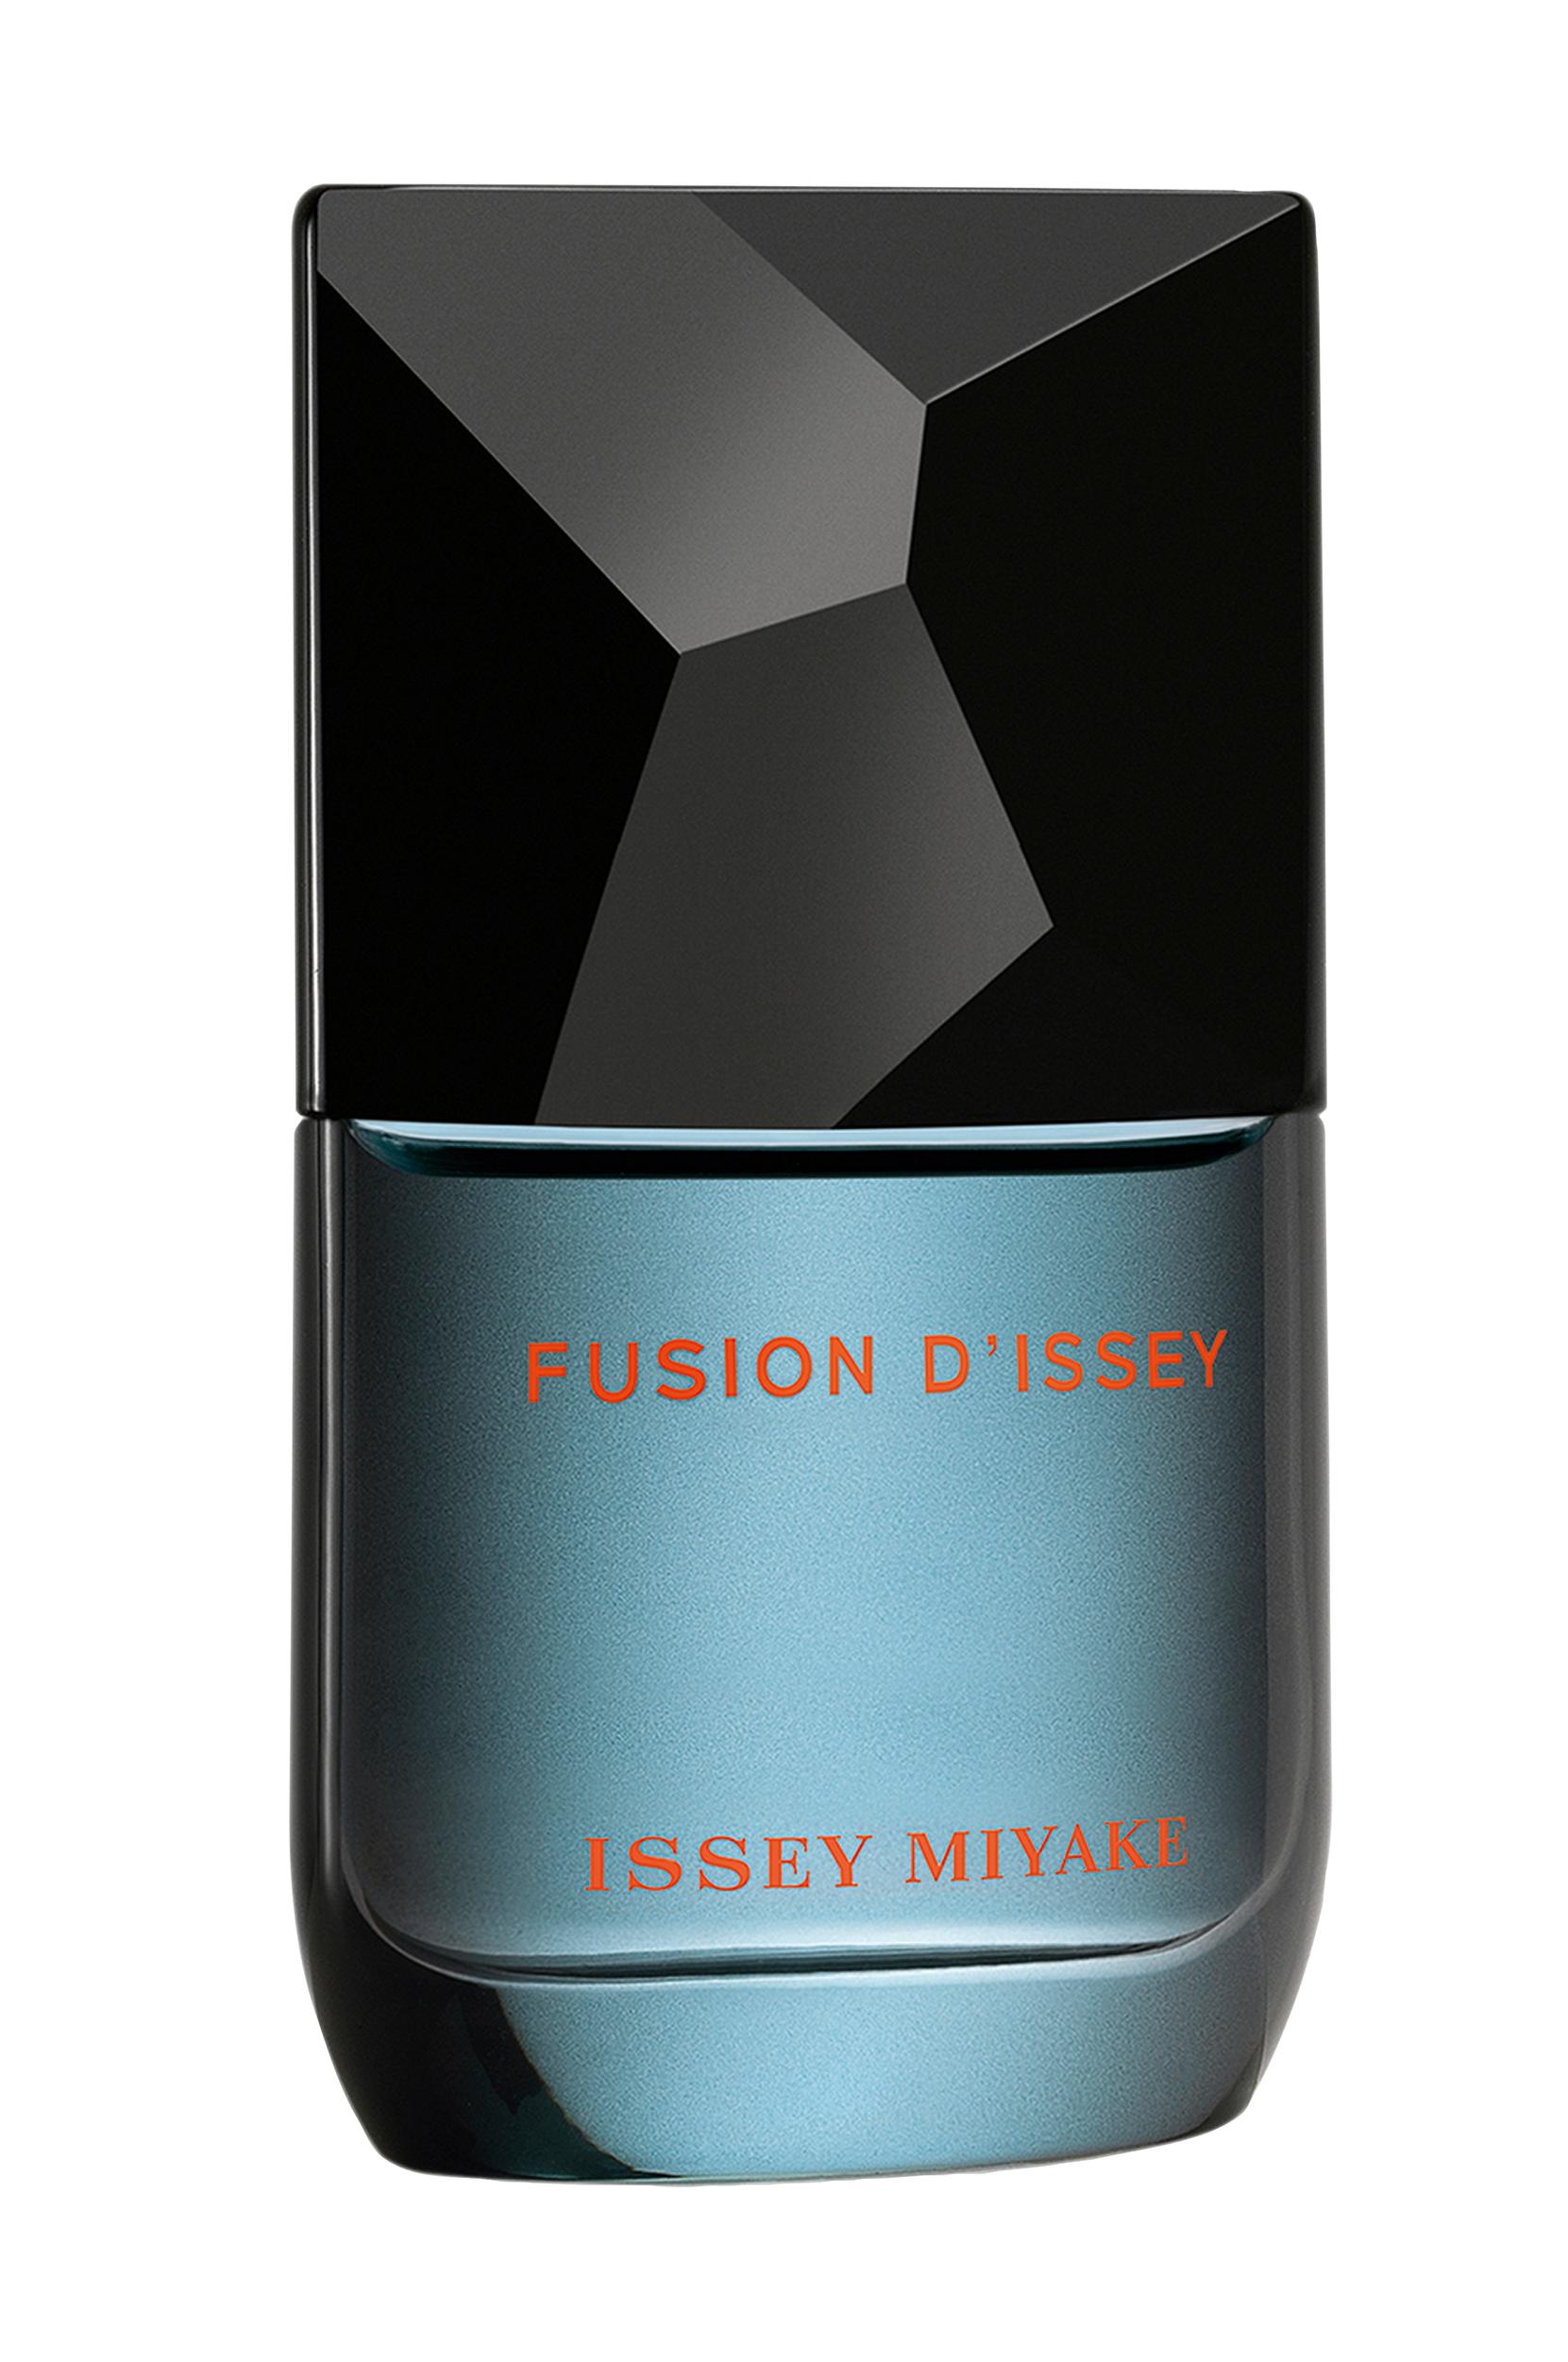 Fusion d'Issey EdT 50 ml, Issey Miyake